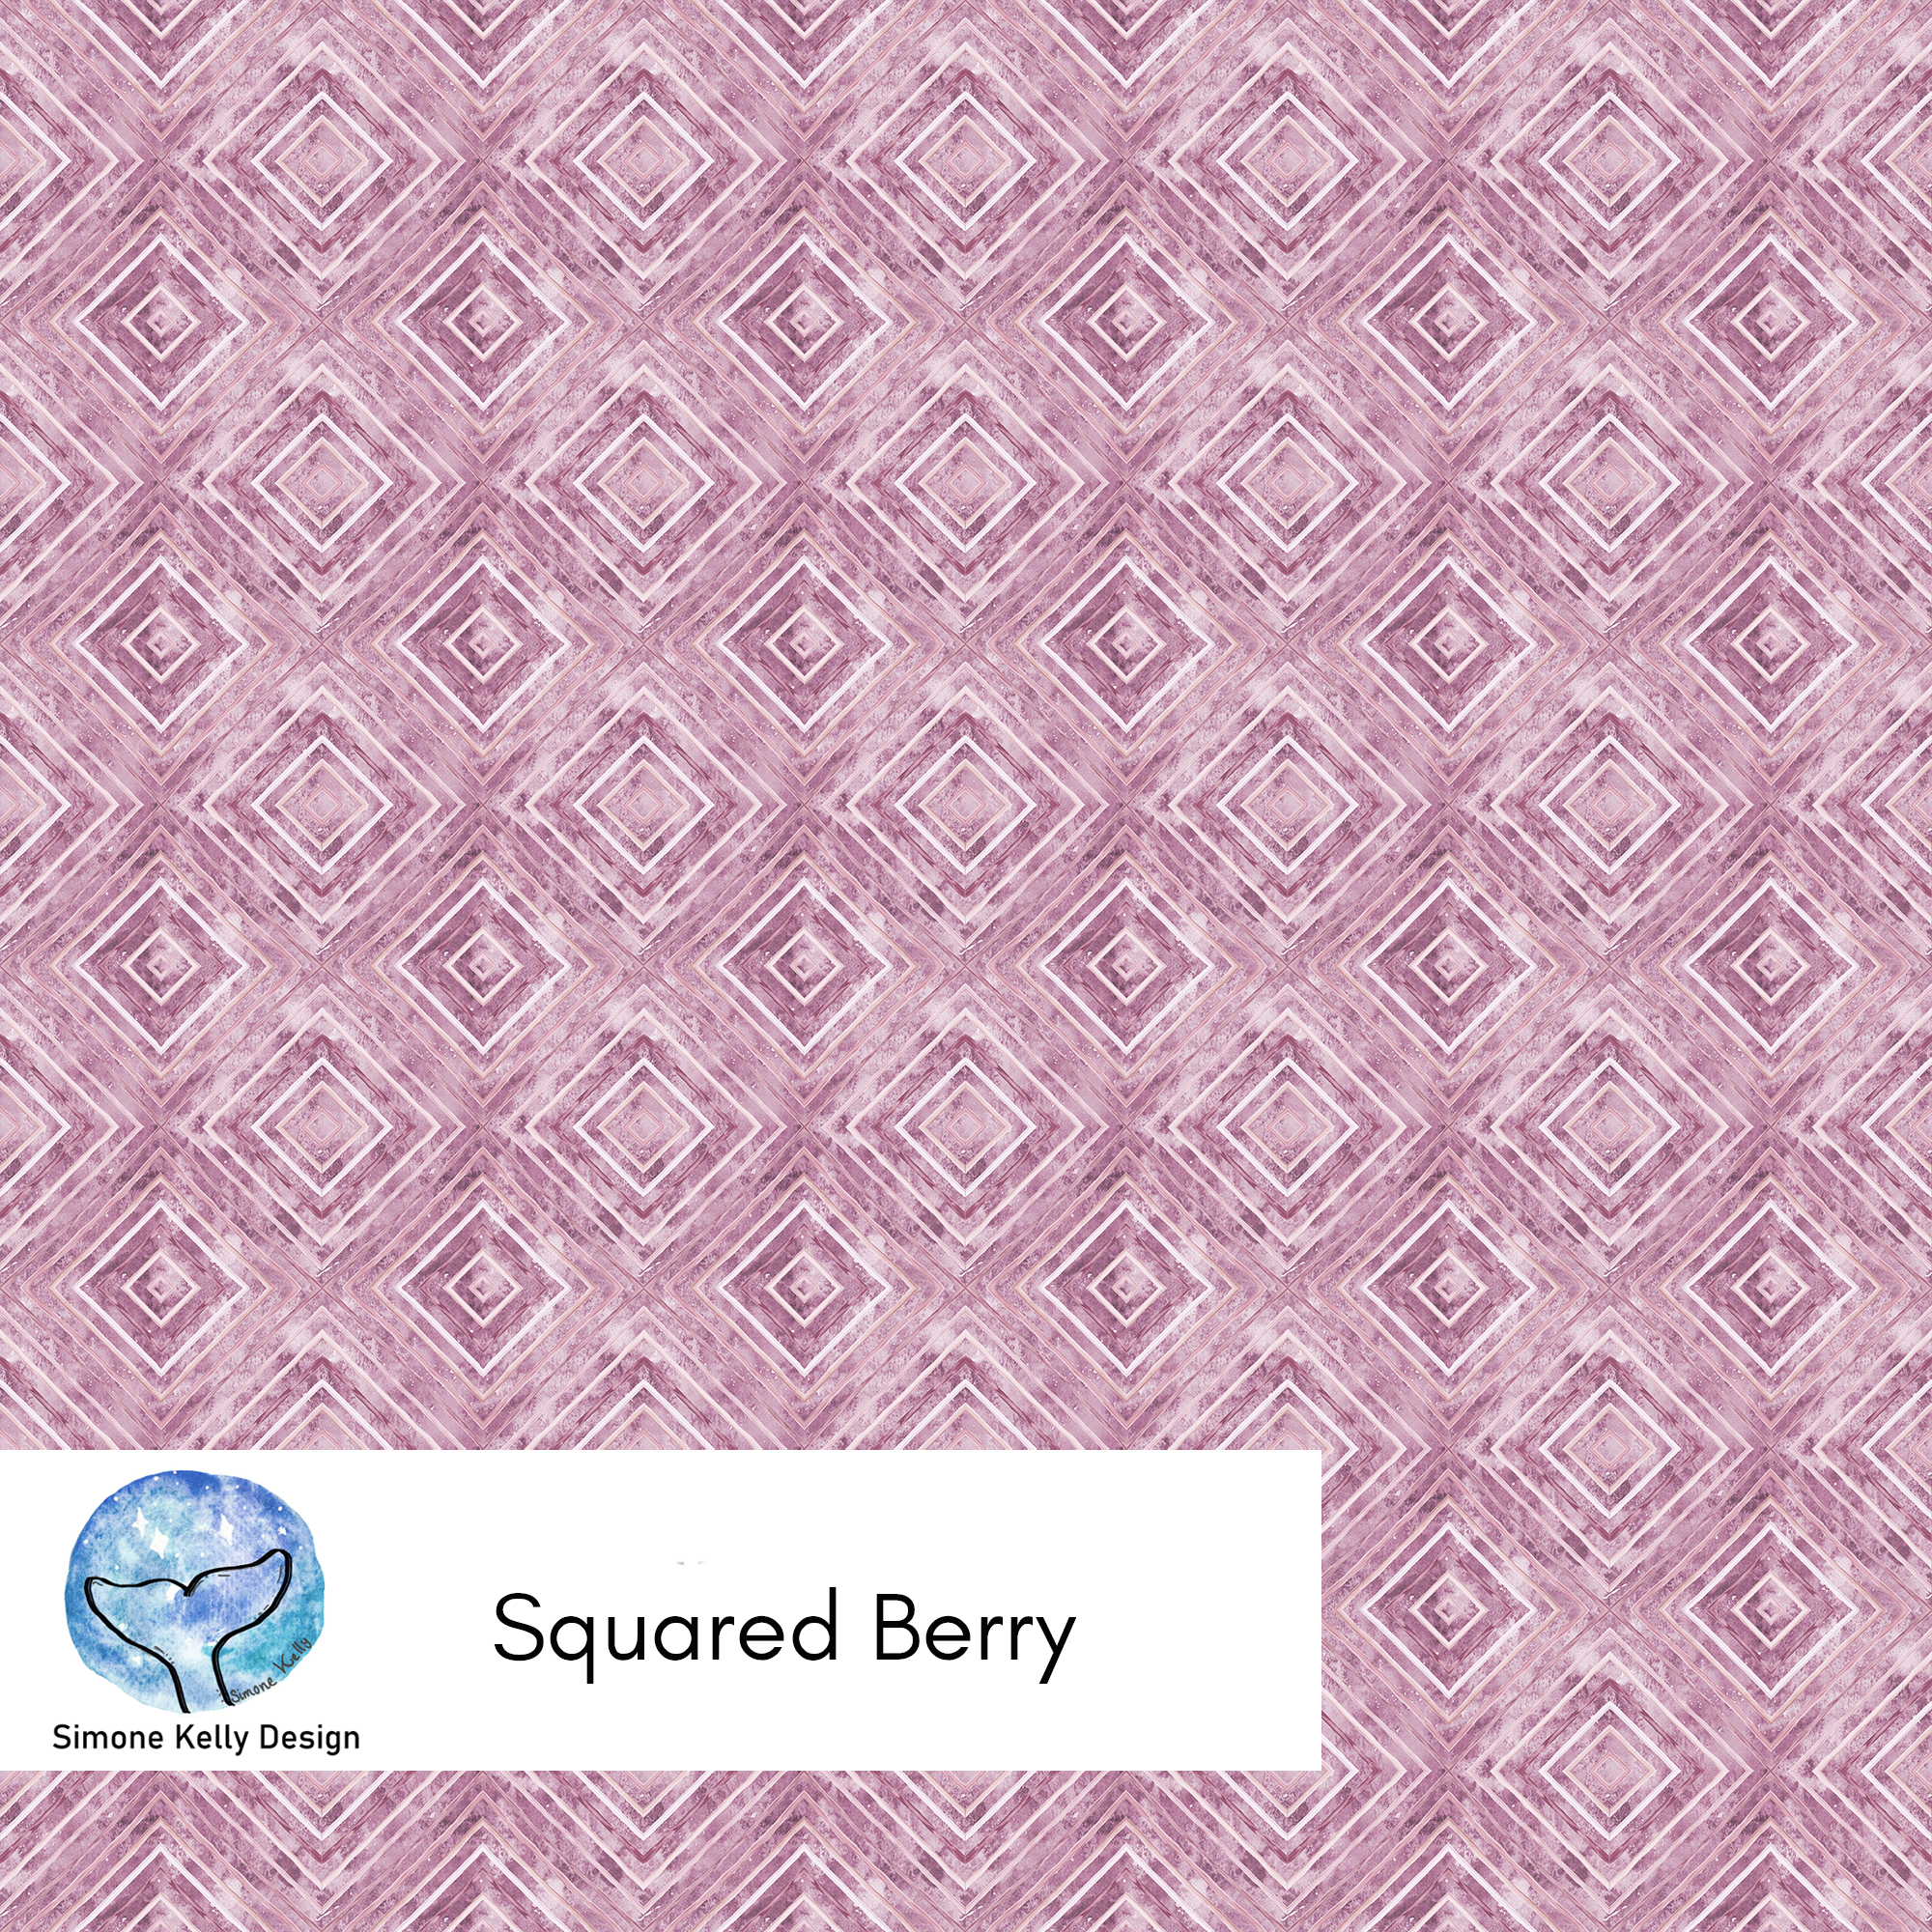 Squared Berry